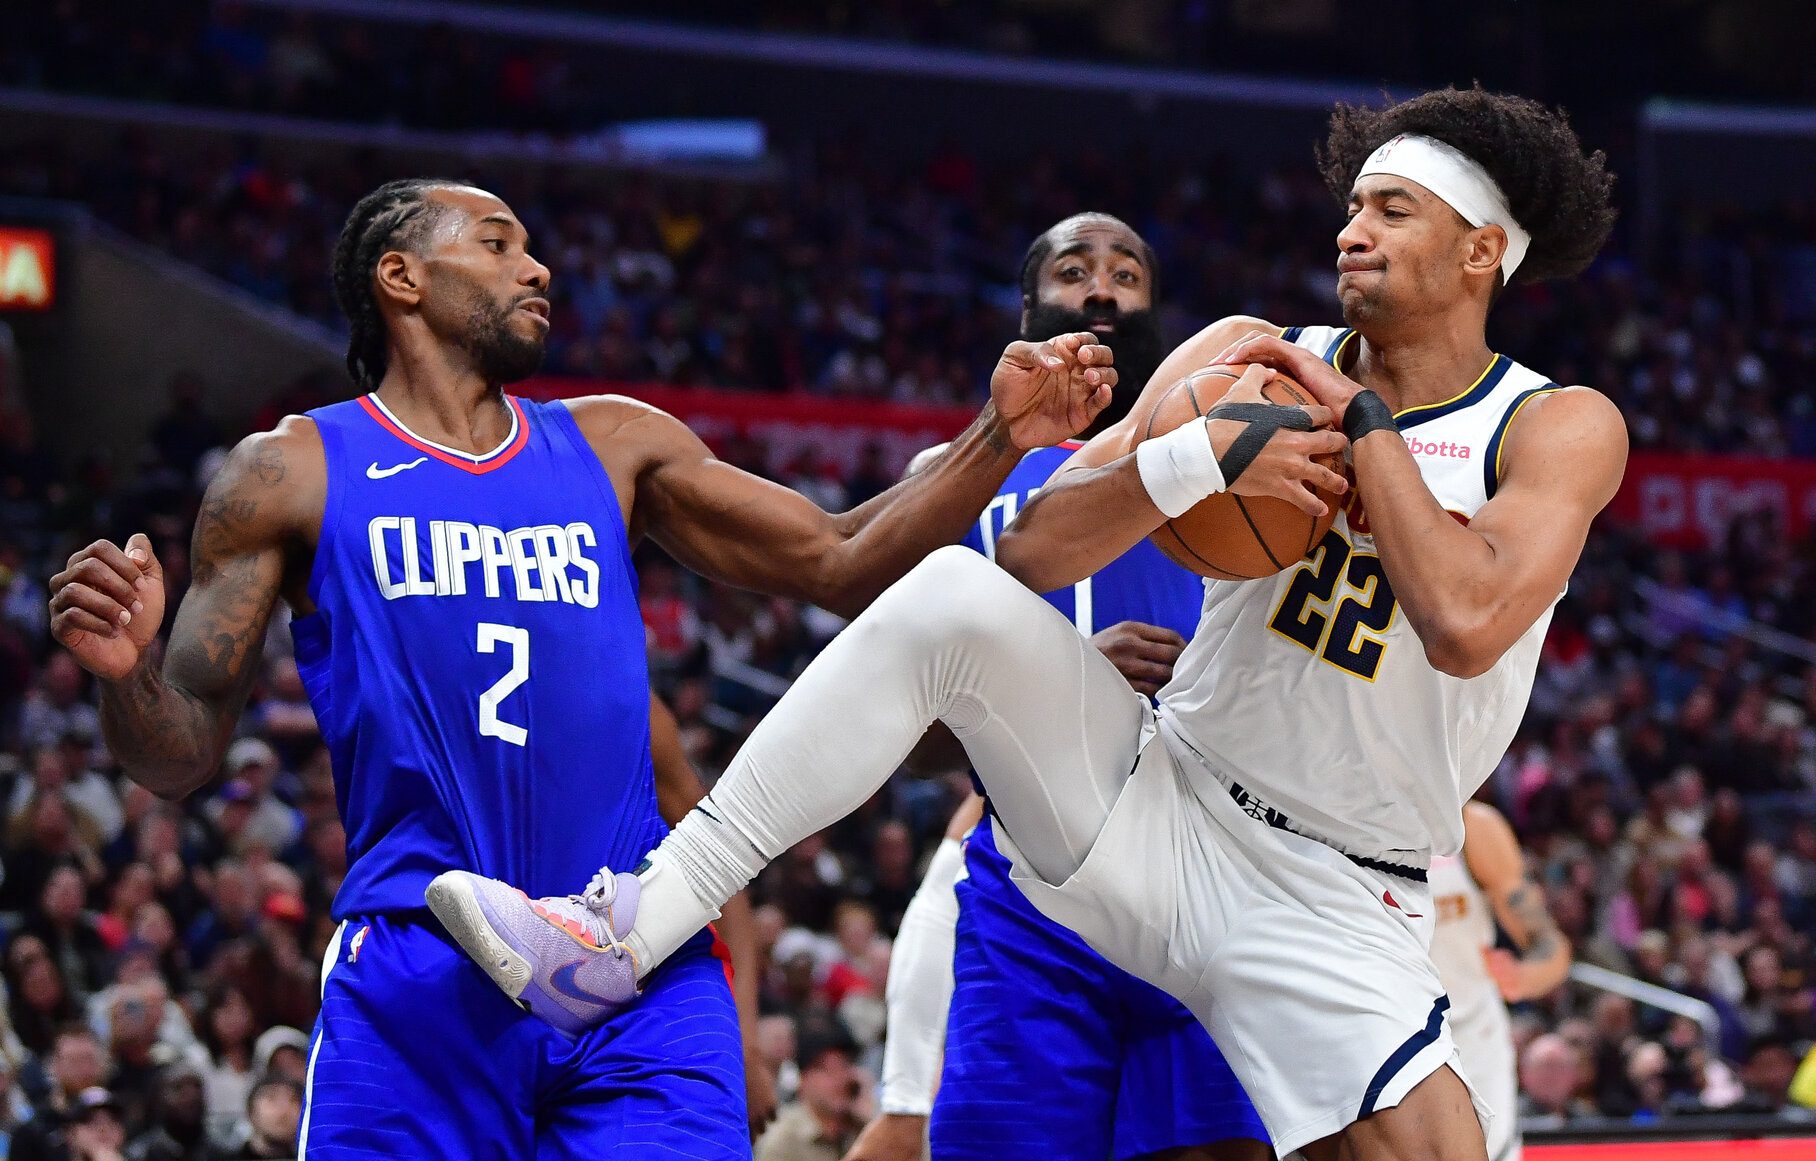 Jokic-less Nuggets stun Clippers off 4th-quarter surge